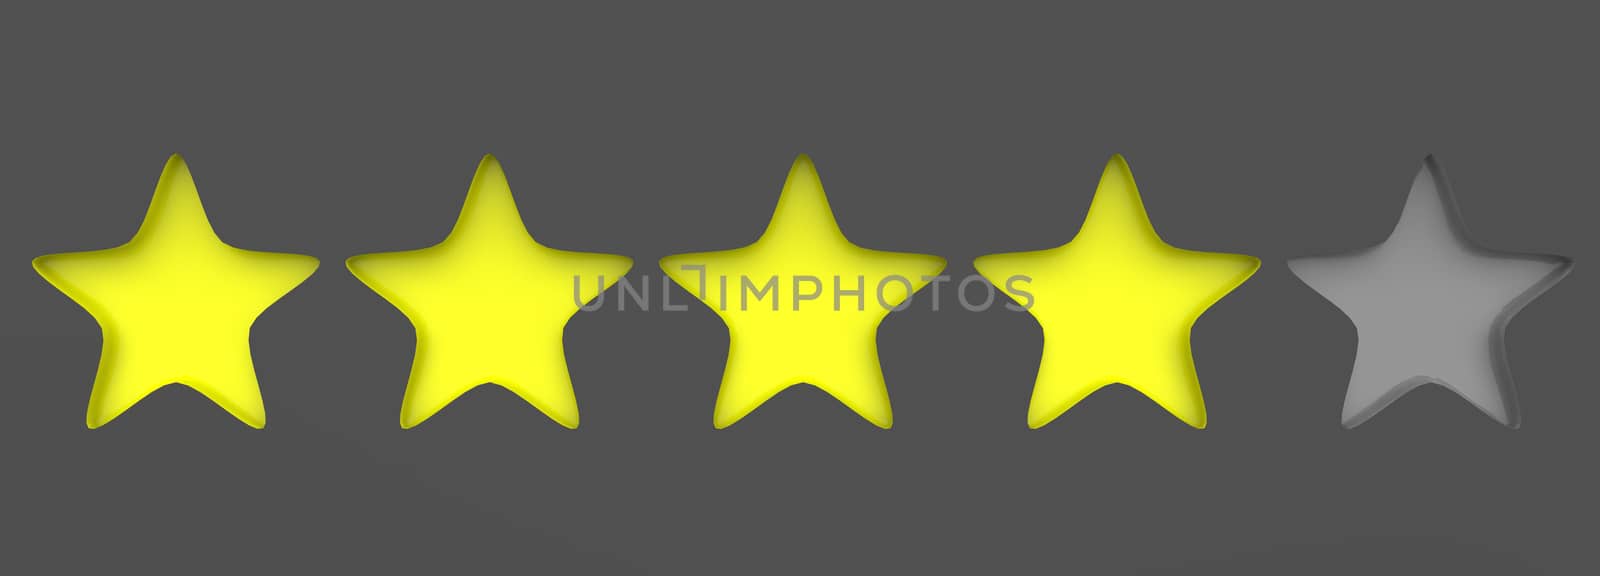 3d yellow four star on color background. Render and illustration of golden star for premium review by Andreajk3